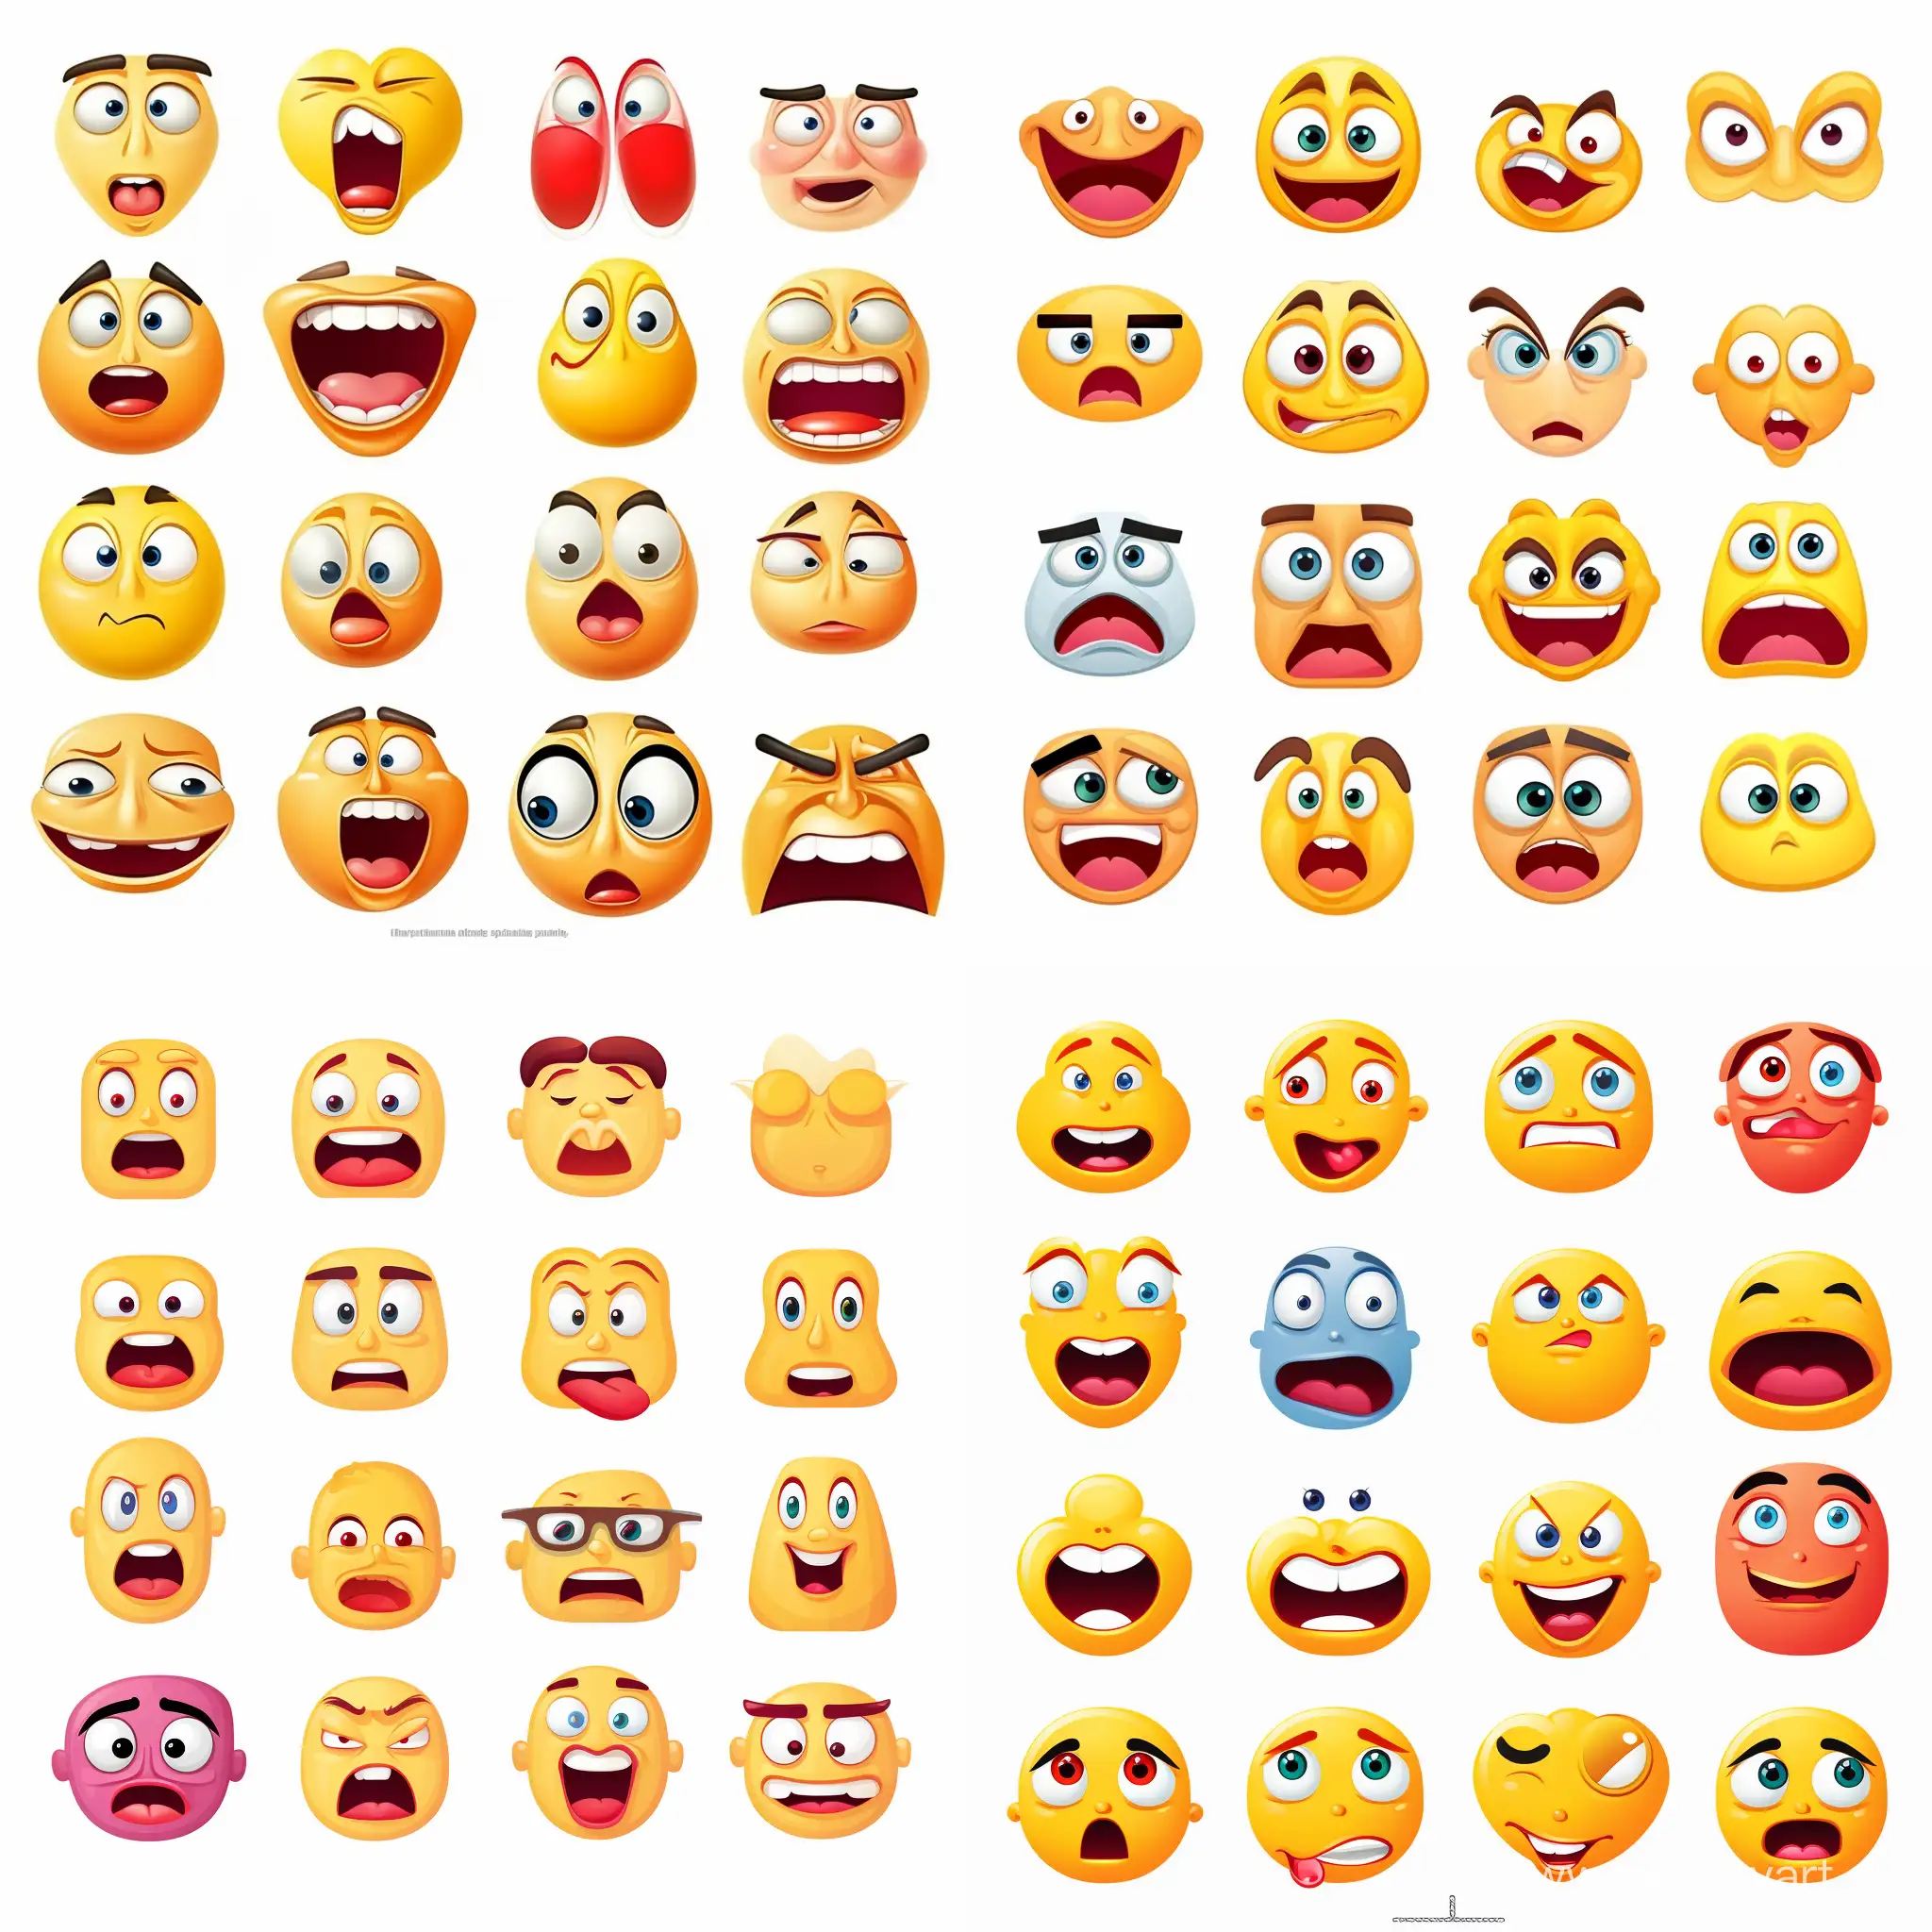 combined different elements of facial expressions in one emotion such as smile, surprise, sadness, anger, surprise, something that looks like oversaturated emotions, isolated on white, emoji style